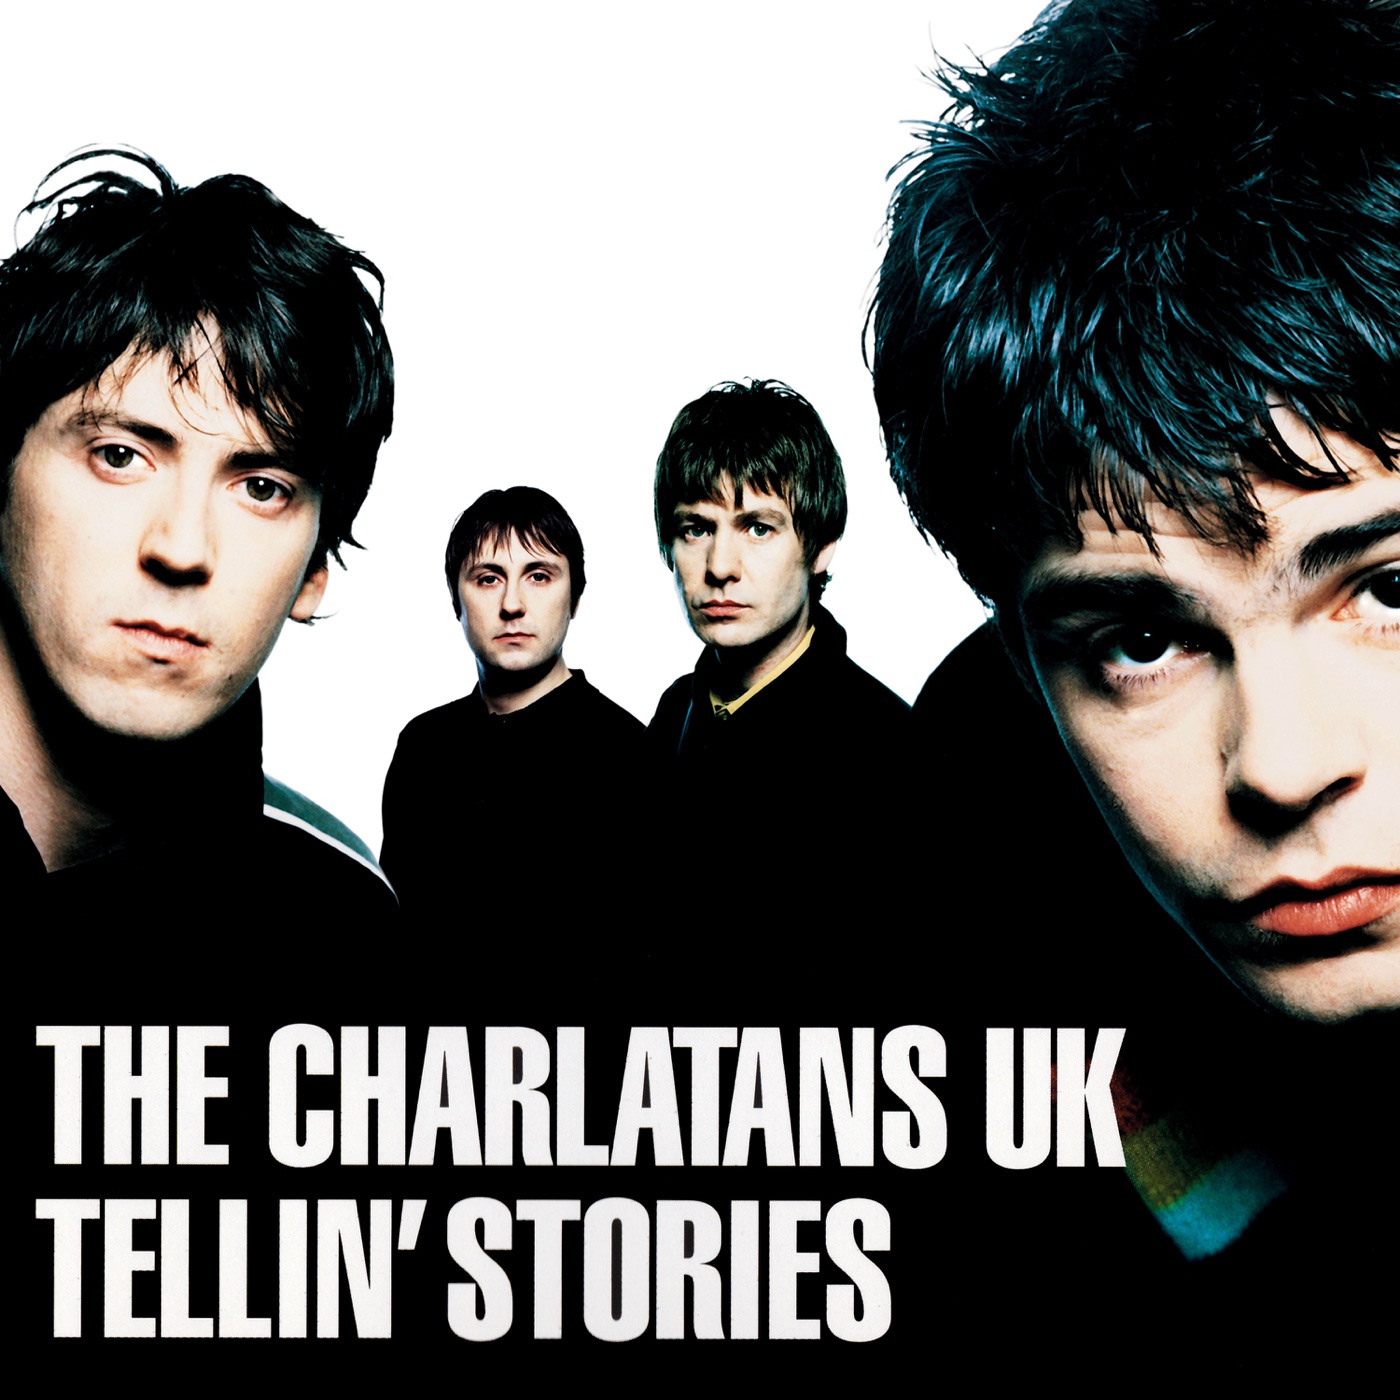 Tellin' Stories by The Charlatans